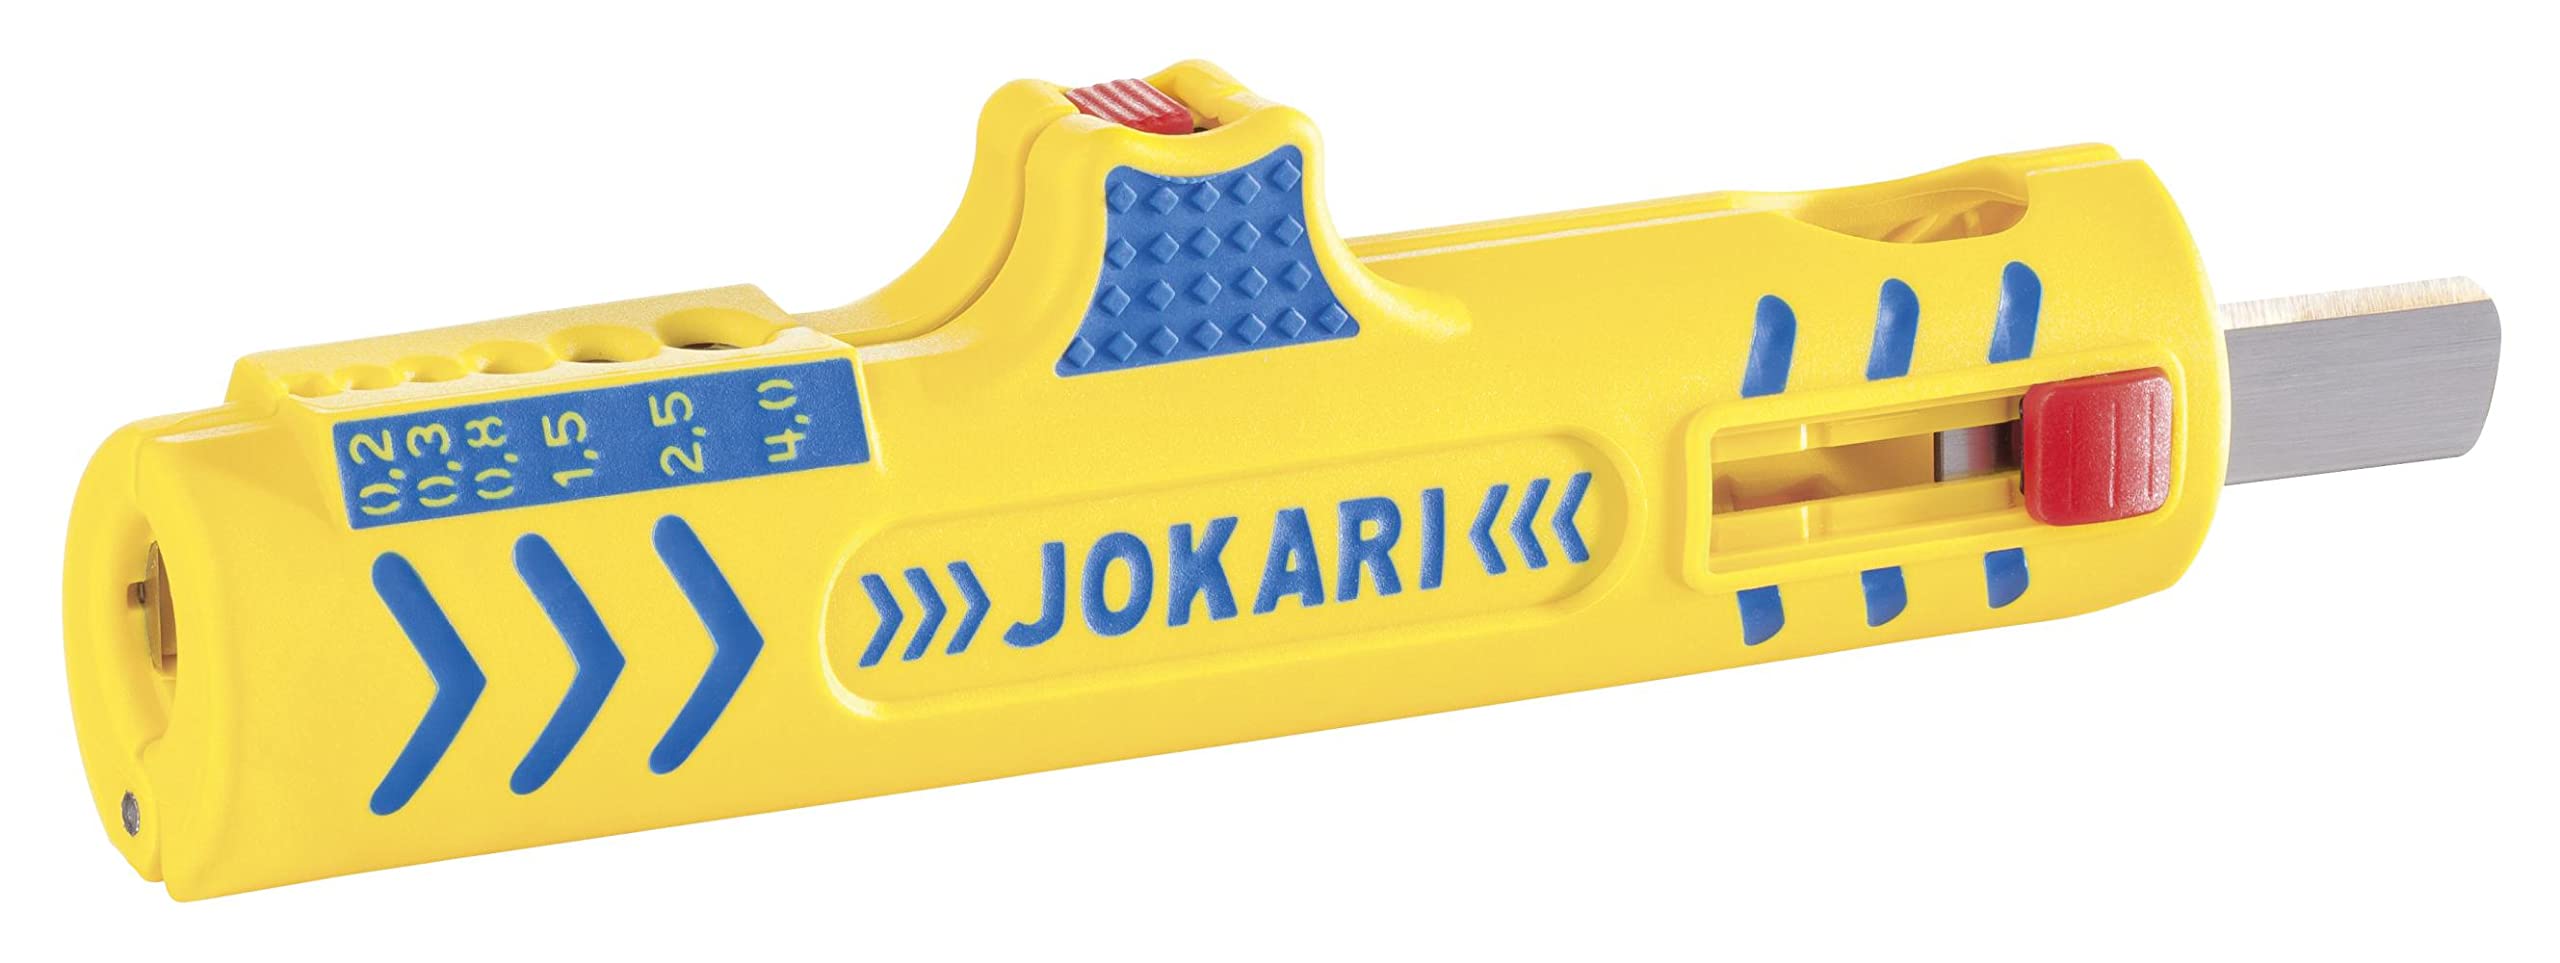 Best Price Square SECURA Cable Stripper NO.15 30155 by JOKARI